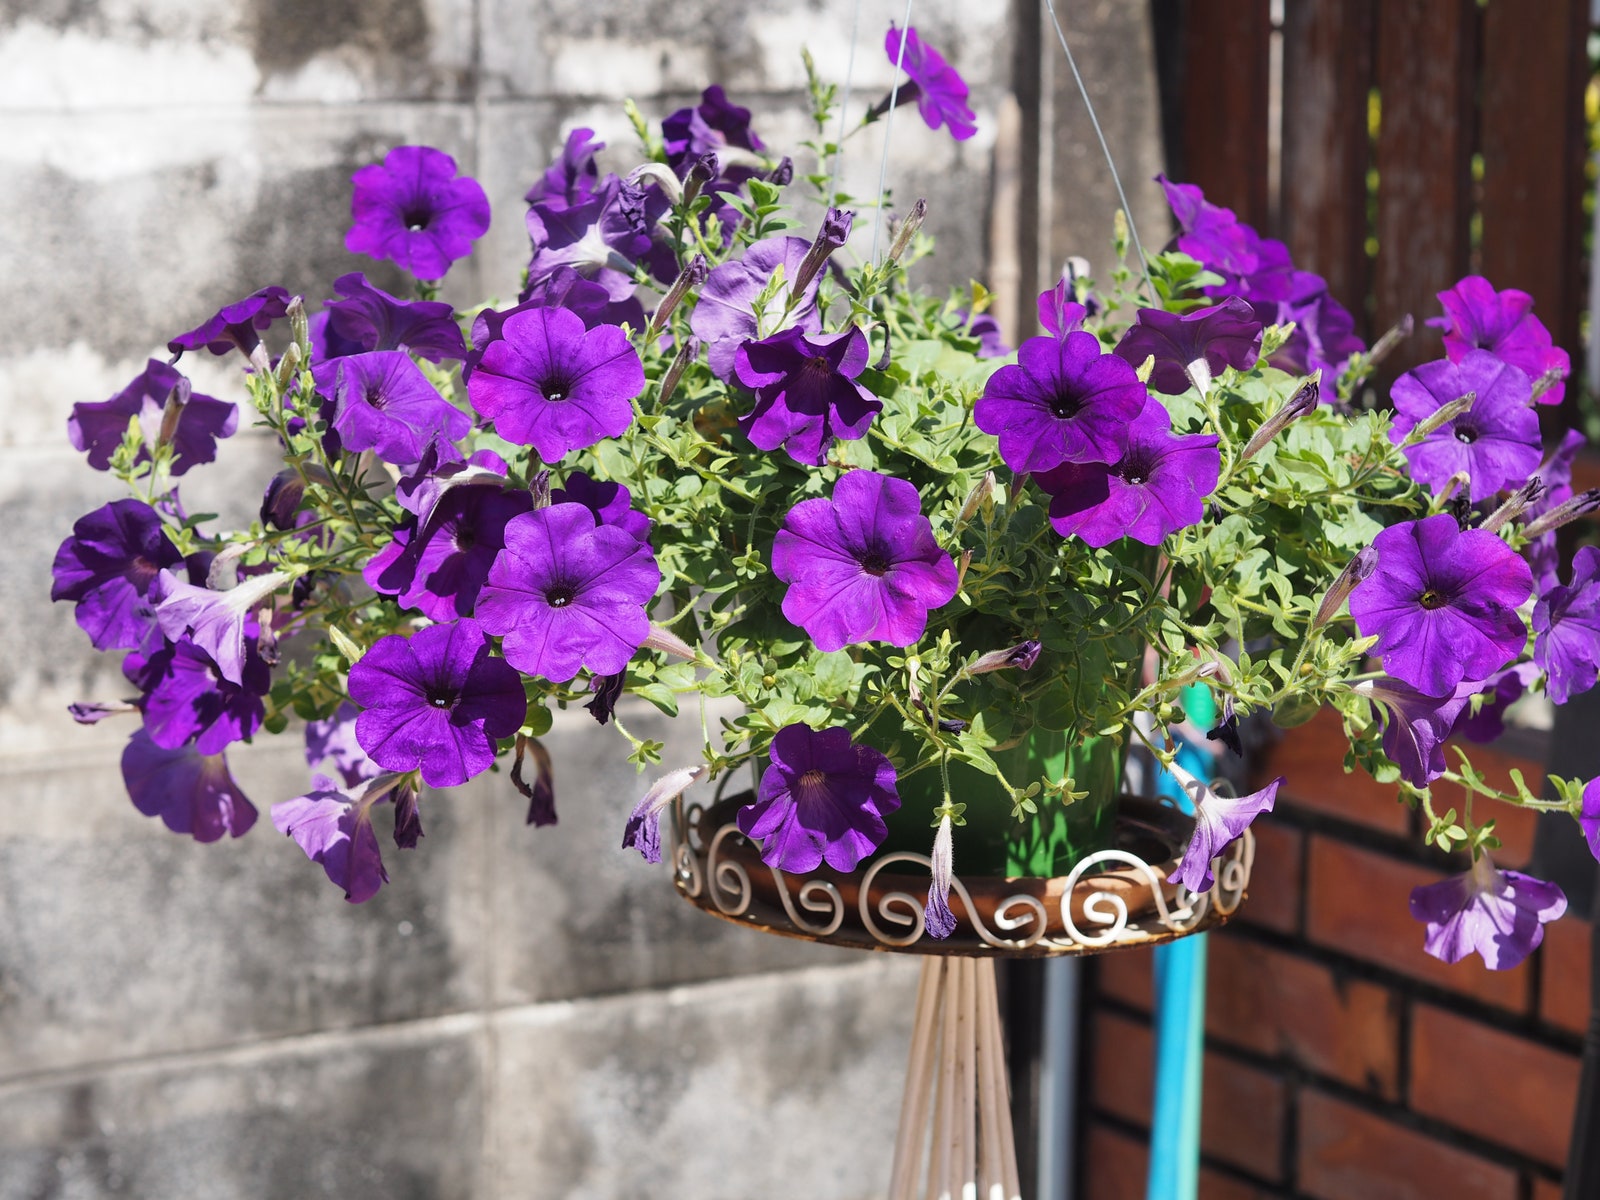 African violet flowers in a hanging planter